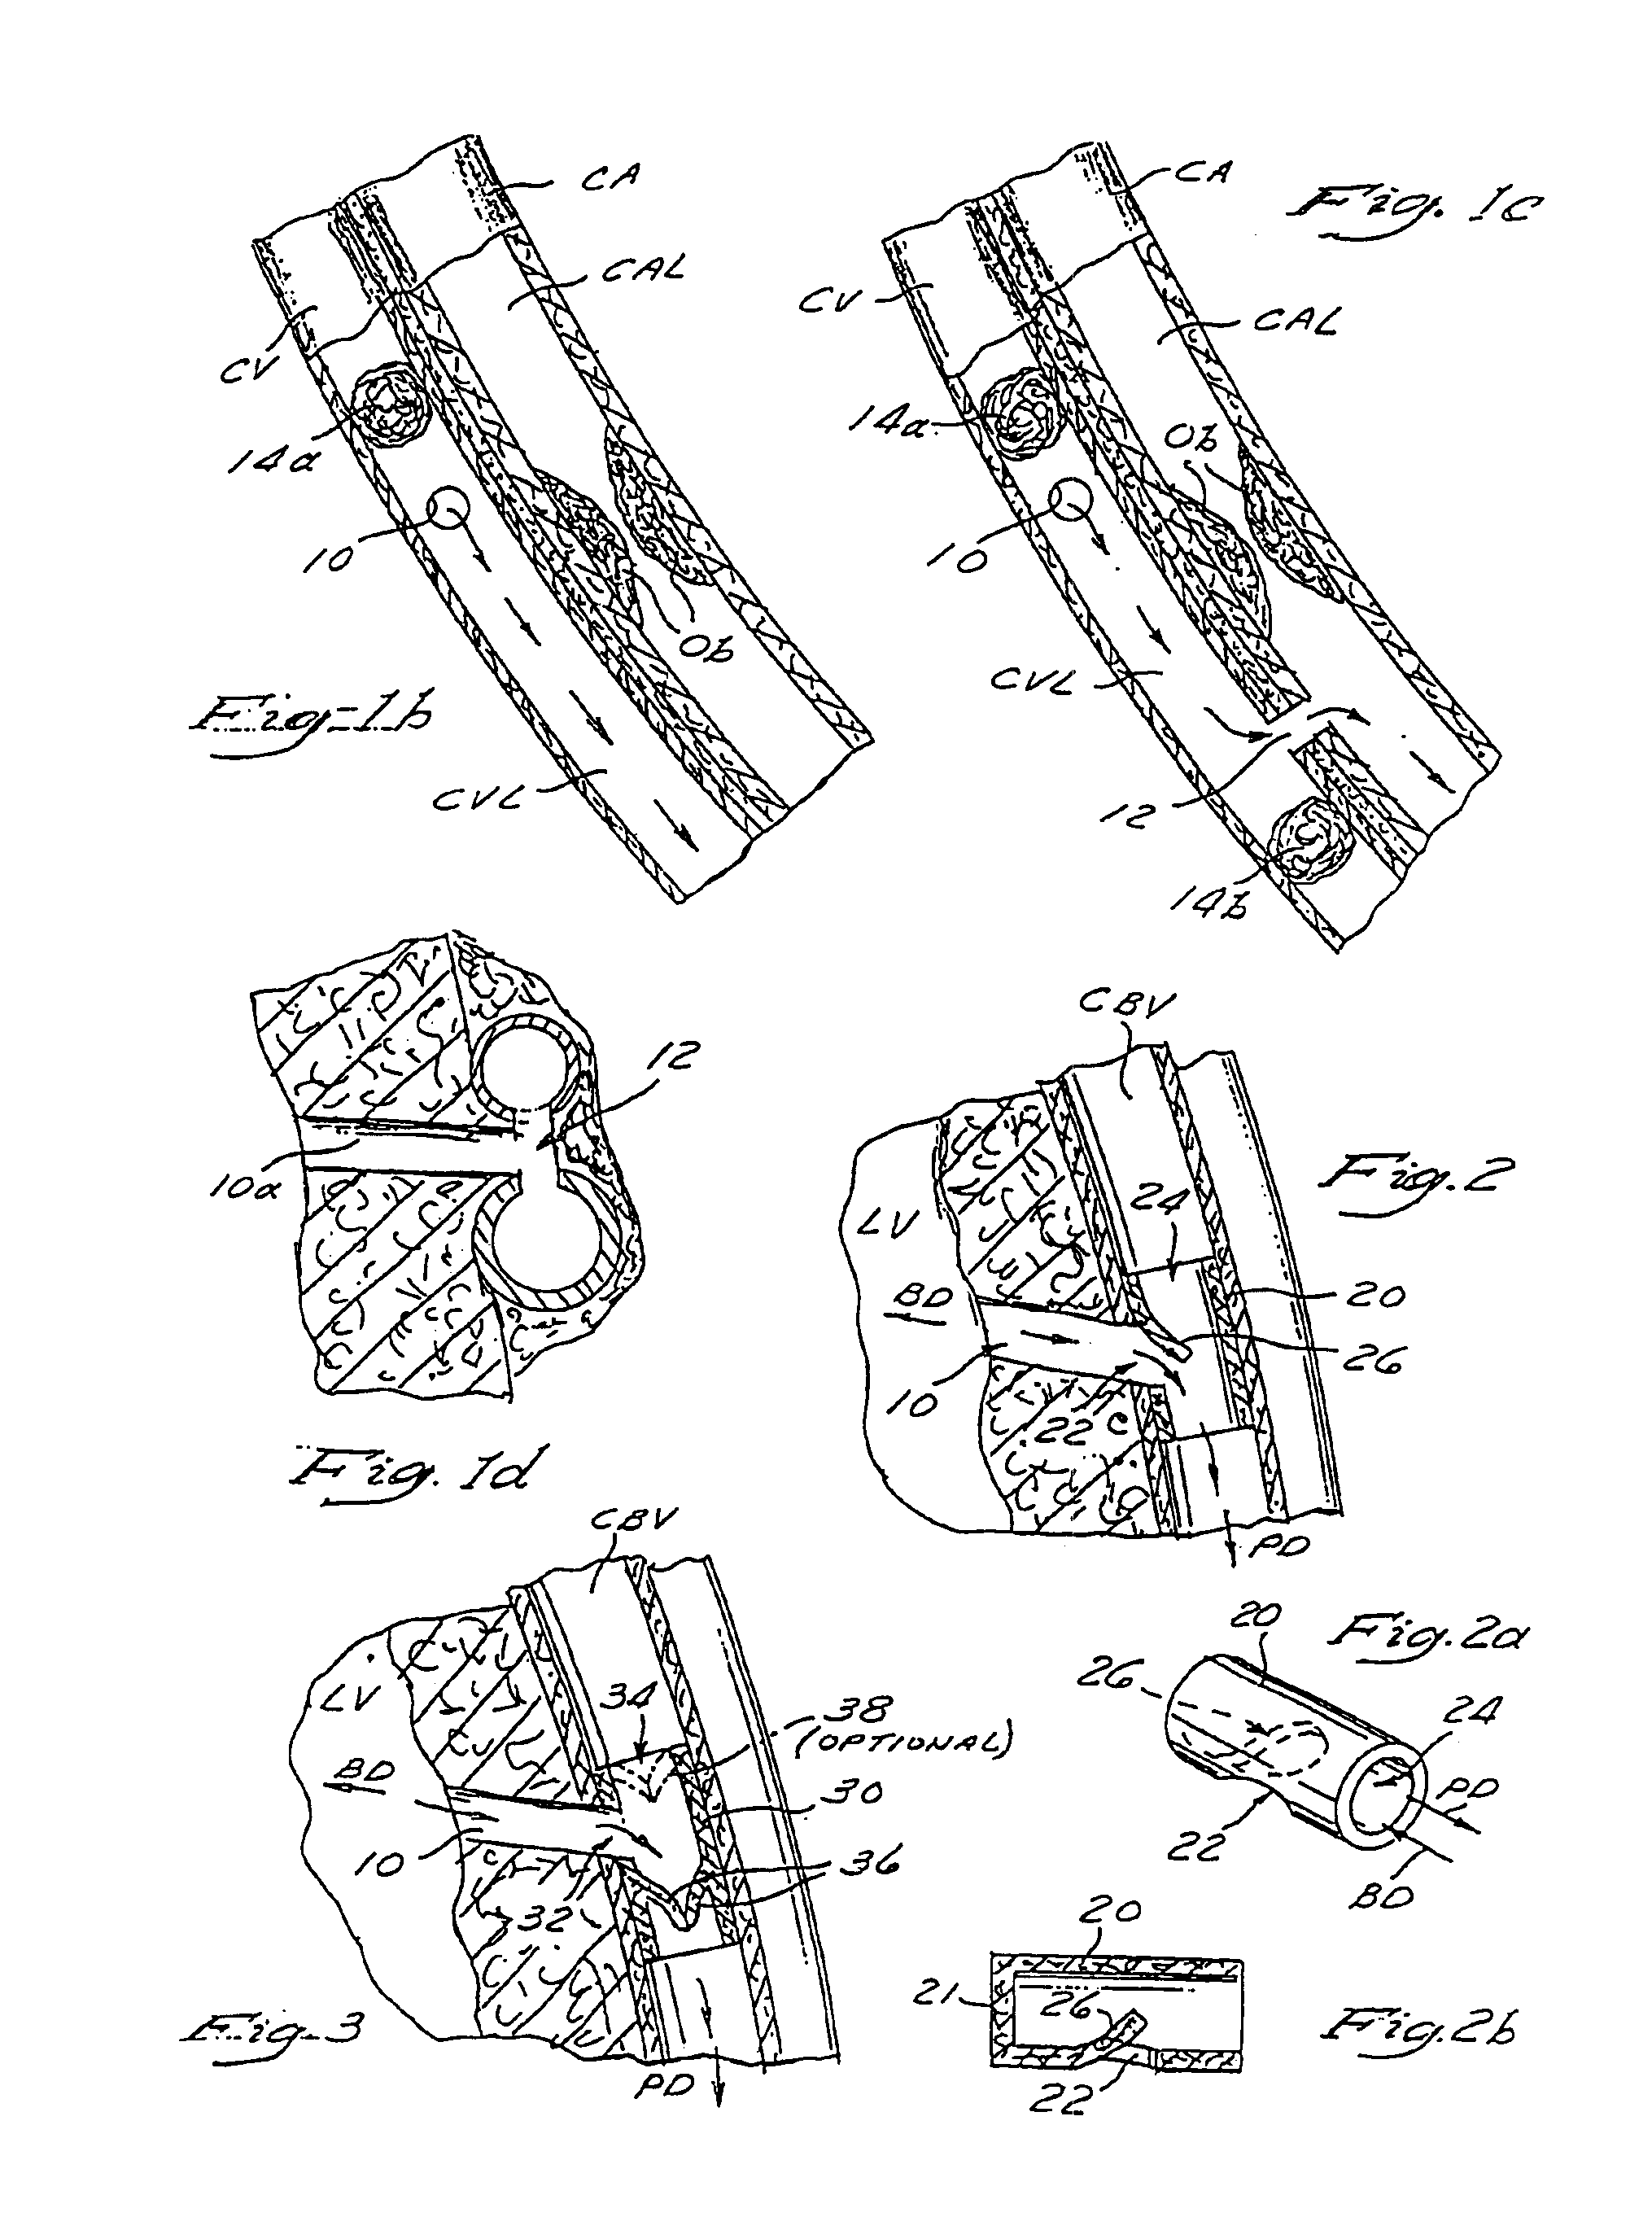 Method and apparatus for transmyocardial direct coronary revascularization